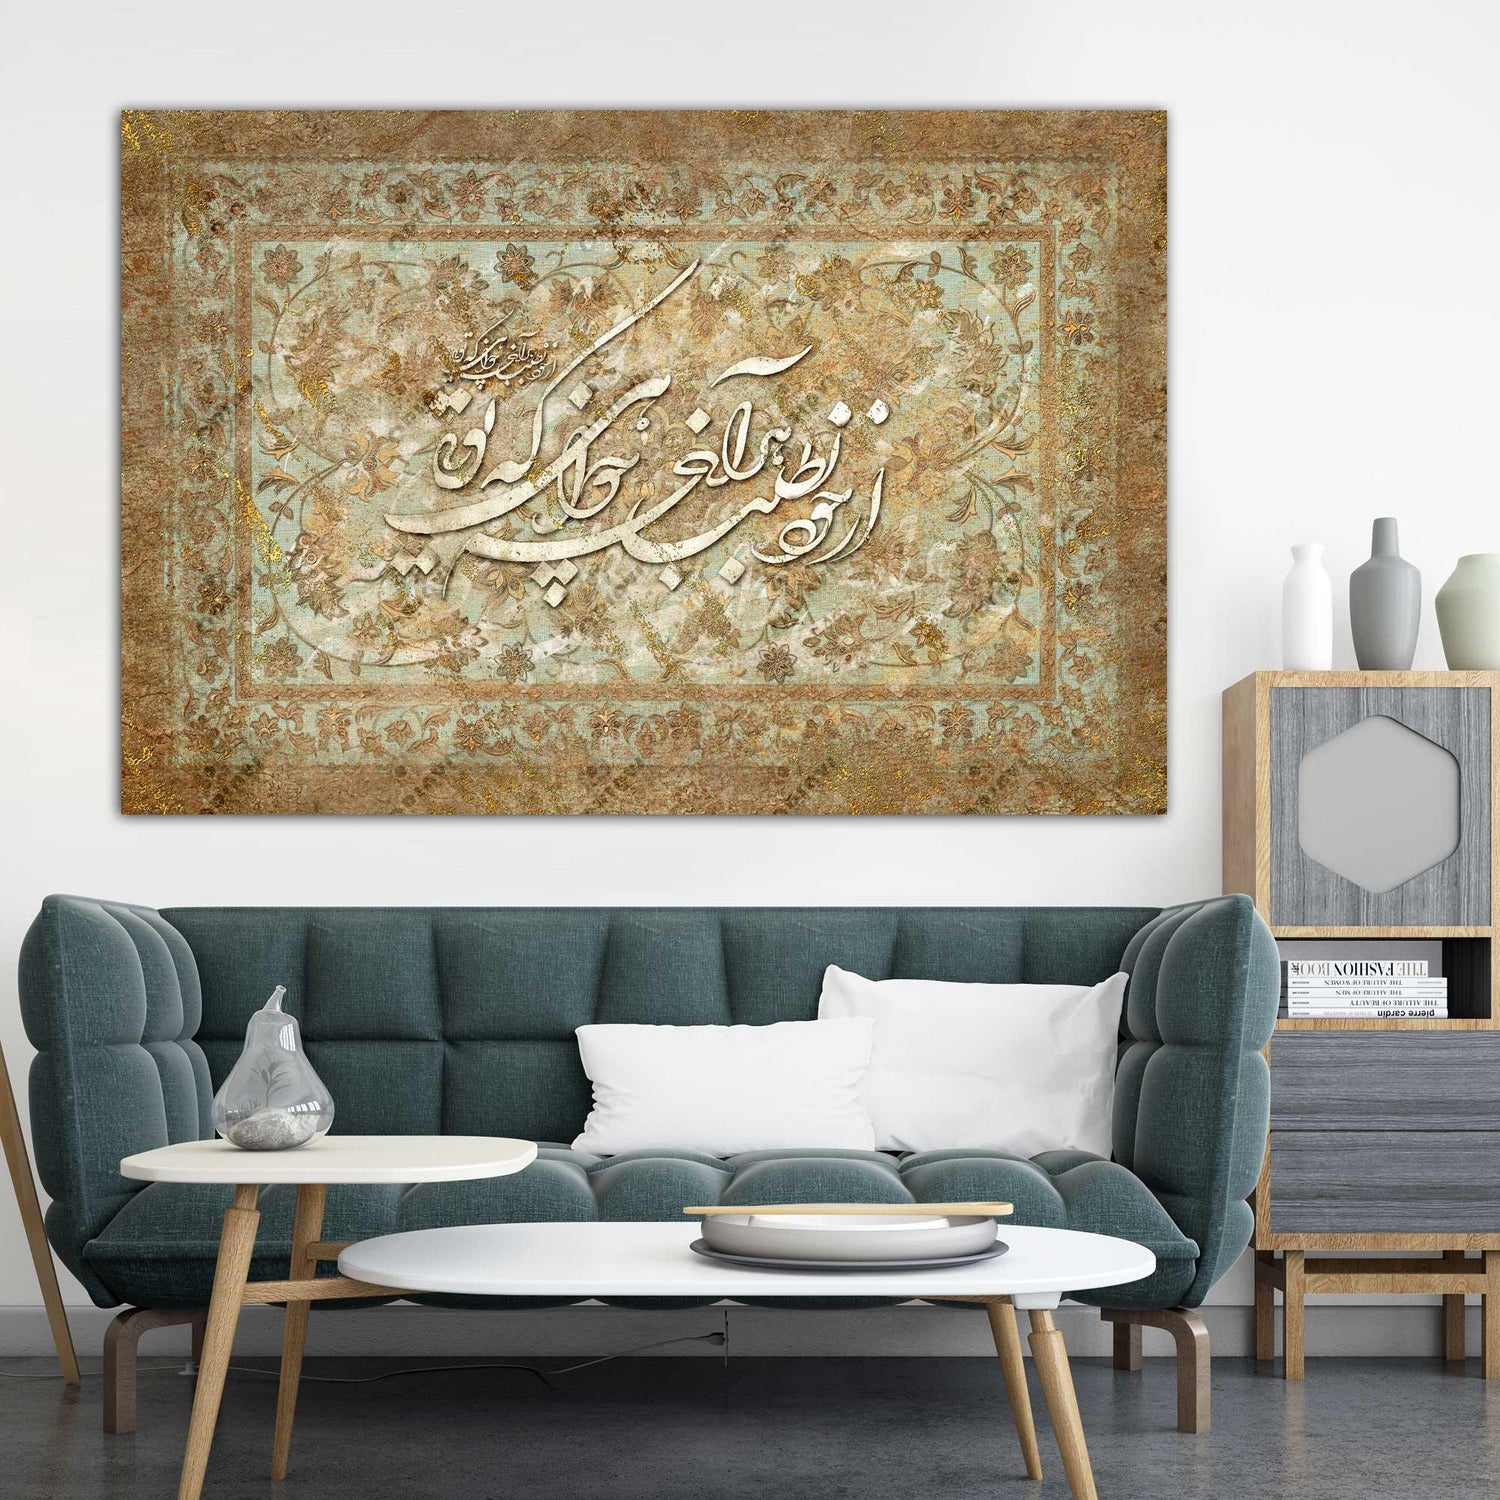 Immerse yourself in the lavishness of Persian art with our exquisite Iranian Wall Art. Indulge in the captivating allure of this piece, showcasing a spellbinding poem, "از خود بطلب هر آنچه خواهی که تویی" (translating to "Seek from within whatever you desire, for you are capable"). This artwork intricately merges traditional motifs with contemporary aesthetics, resulting in a harmonious fusion of heritage and modern artistry.